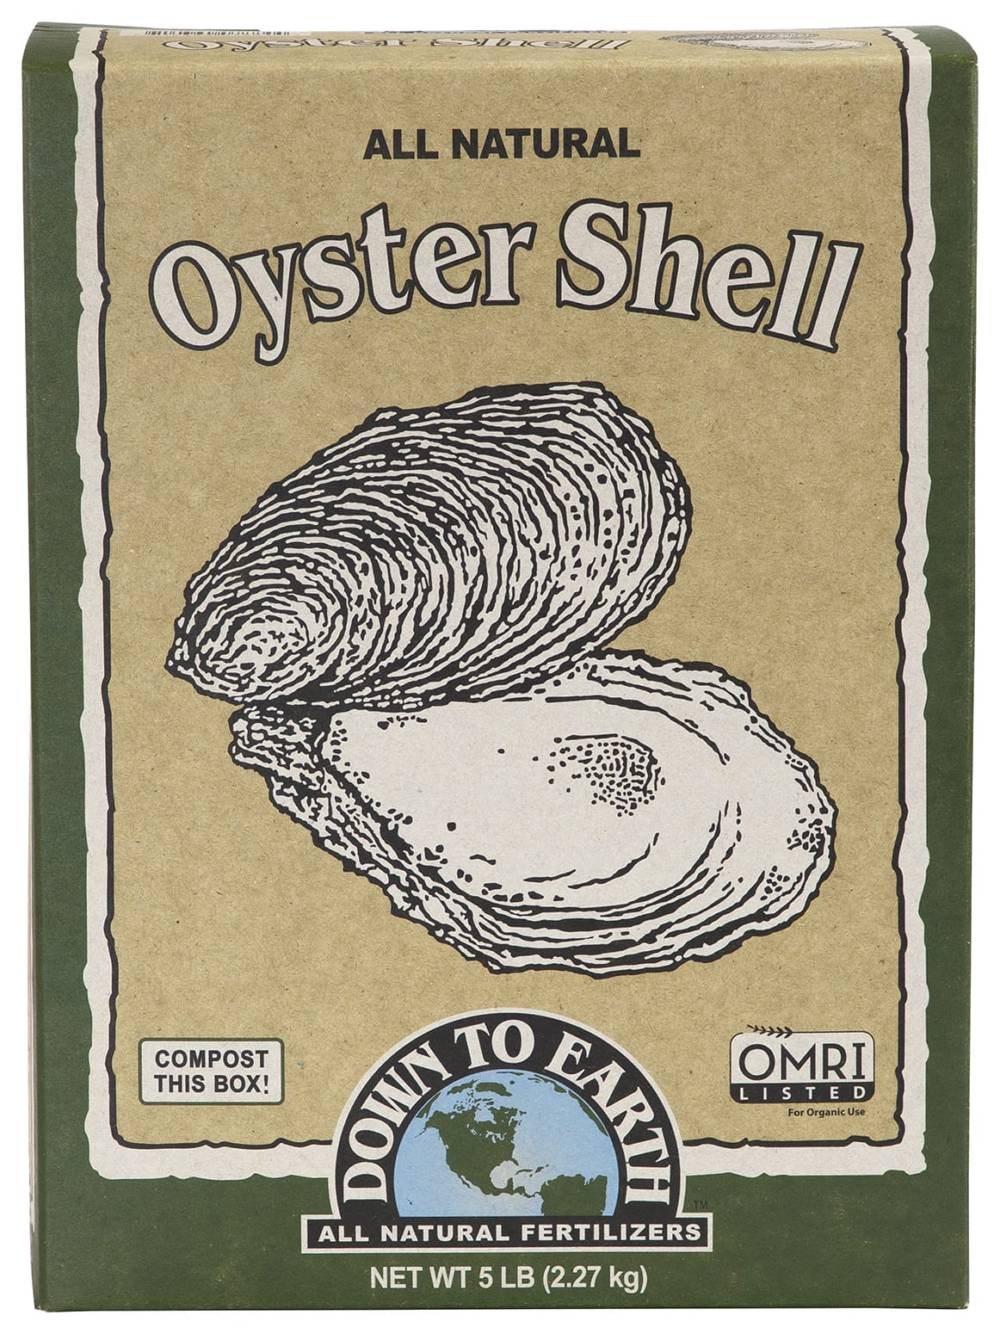 Box of Down To Earth Oyster Shell